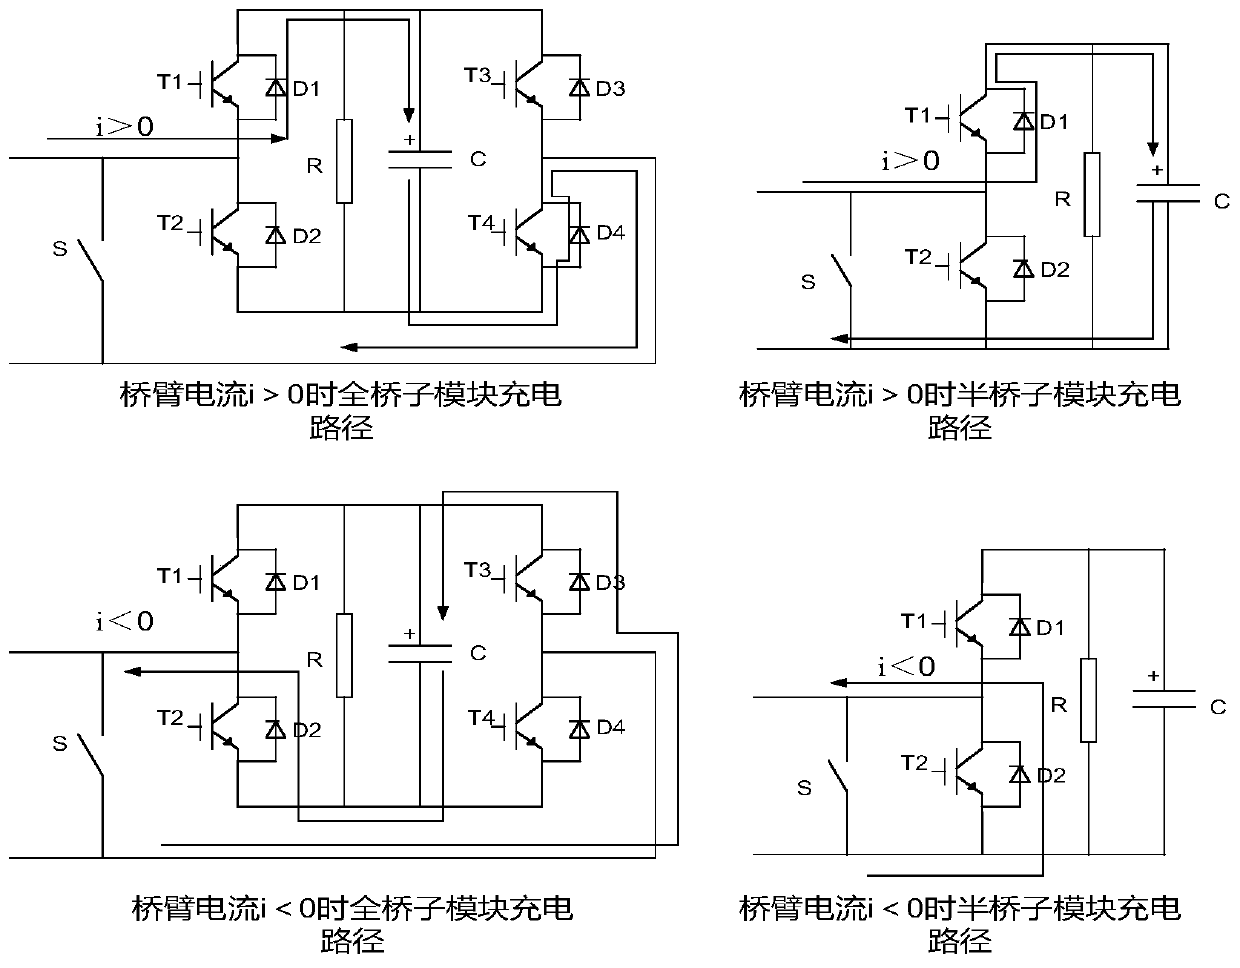 Alternating current charging control strategy suitable for different working conditions of hybrid MMC (modular multilevel converter)